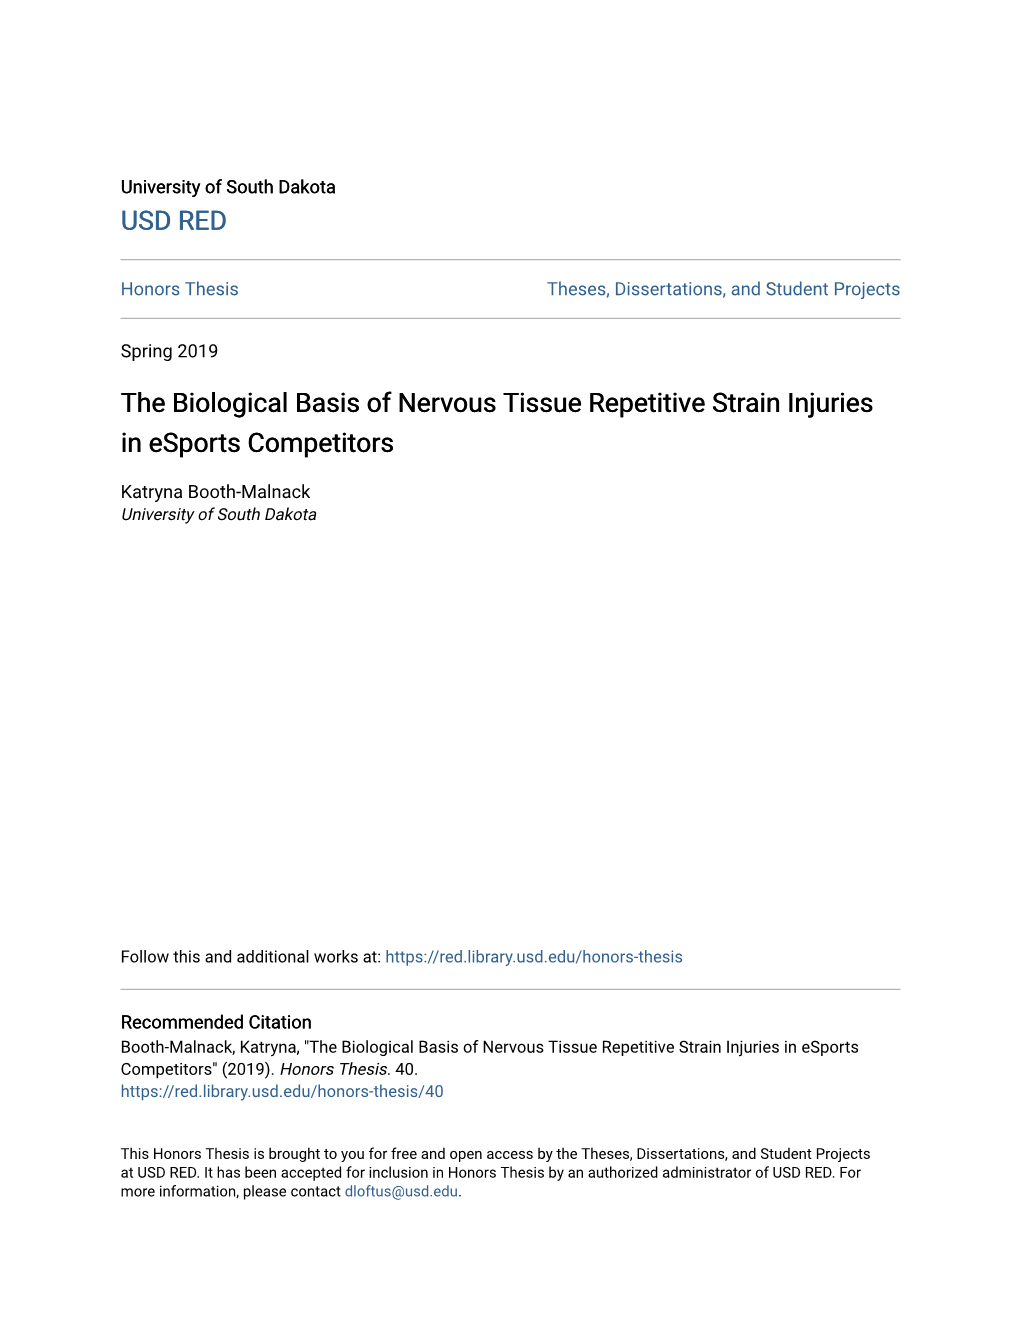 The Biological Basis of Nervous Tissue Repetitive Strain Injuries in Esports Competitors